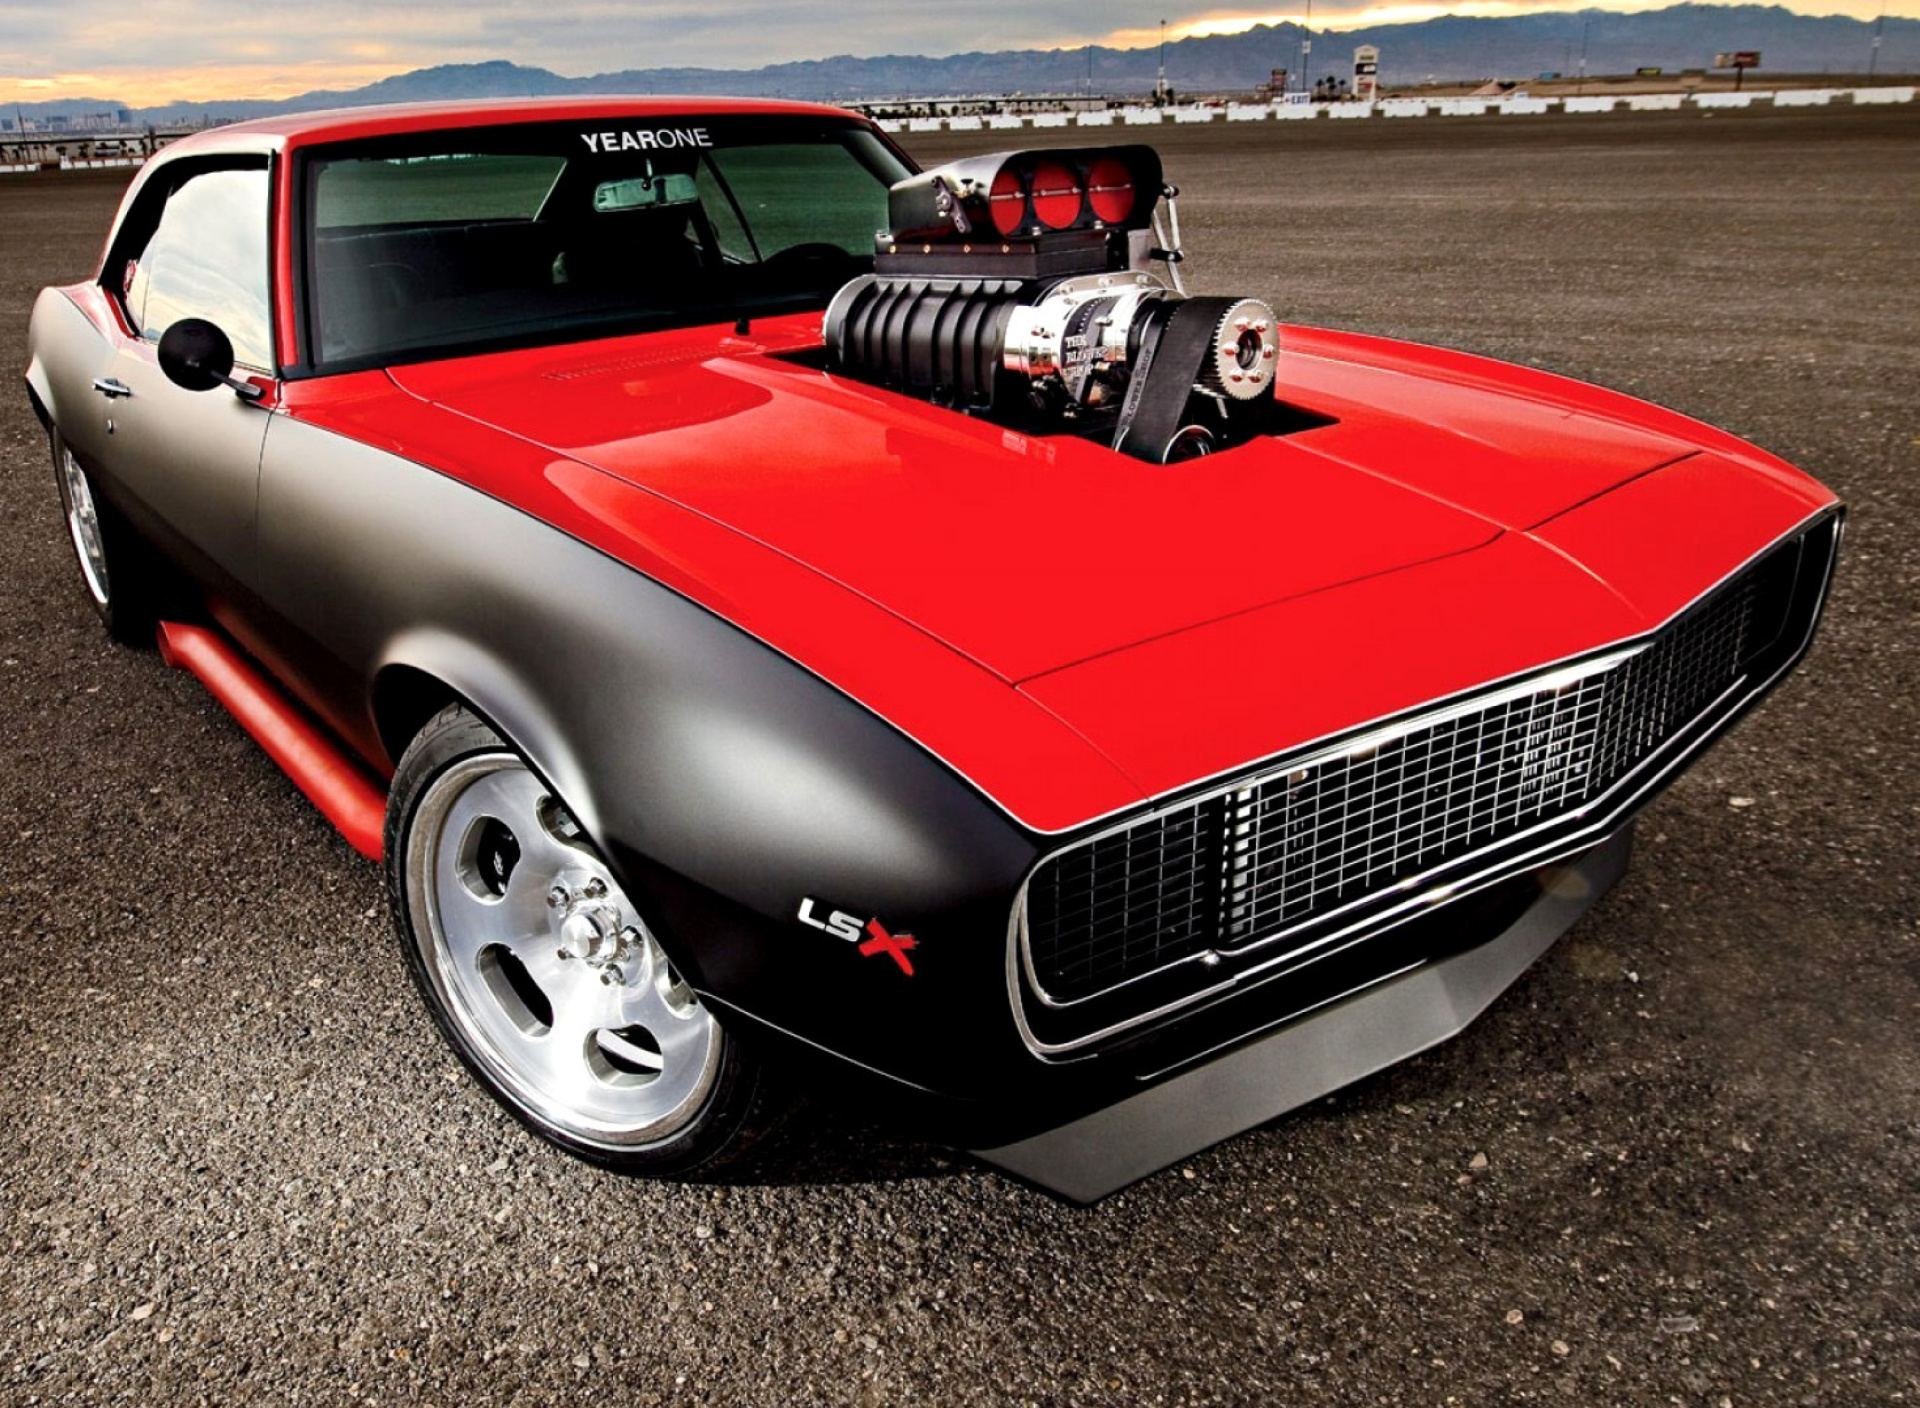 Chevrolet Hot Rod Muscle Car with GM Engine wallpaper 1920x1408